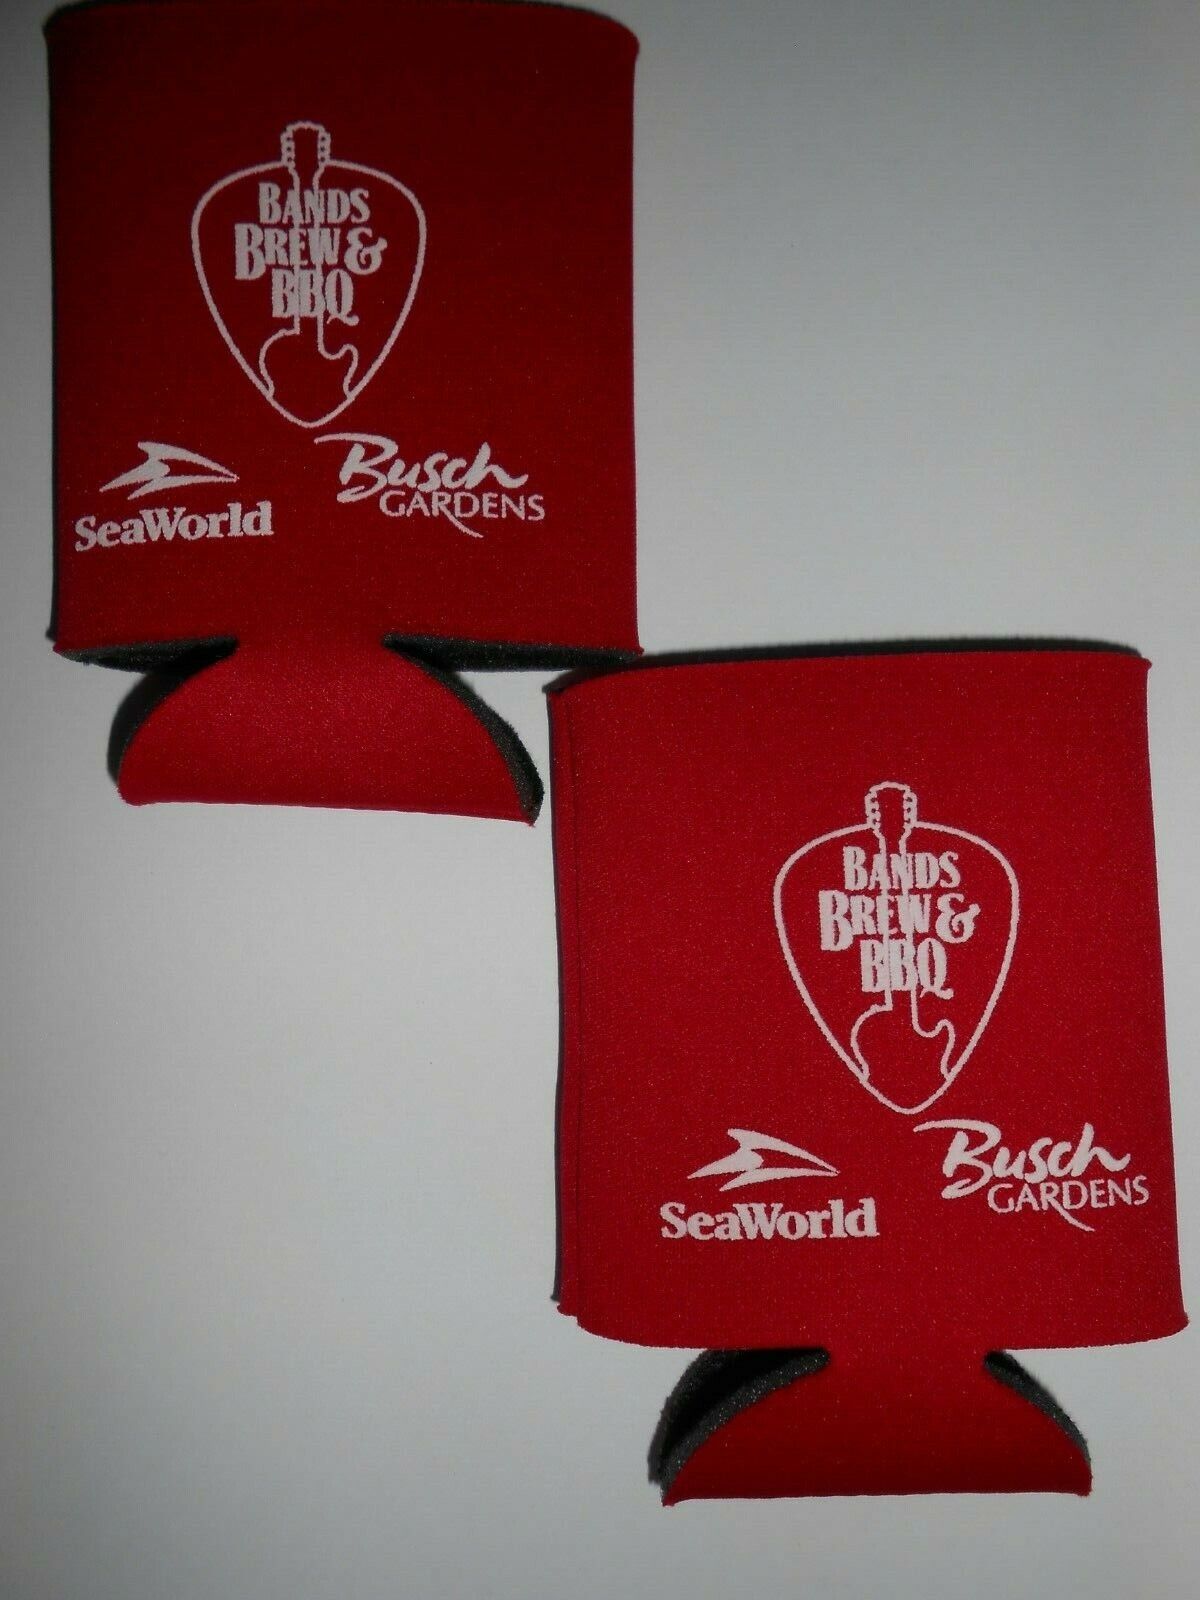 SeaWorld Koozie Bands Brew & BBQ Busch Gardens Guitar Pick Red Set of 2 Can Cozy